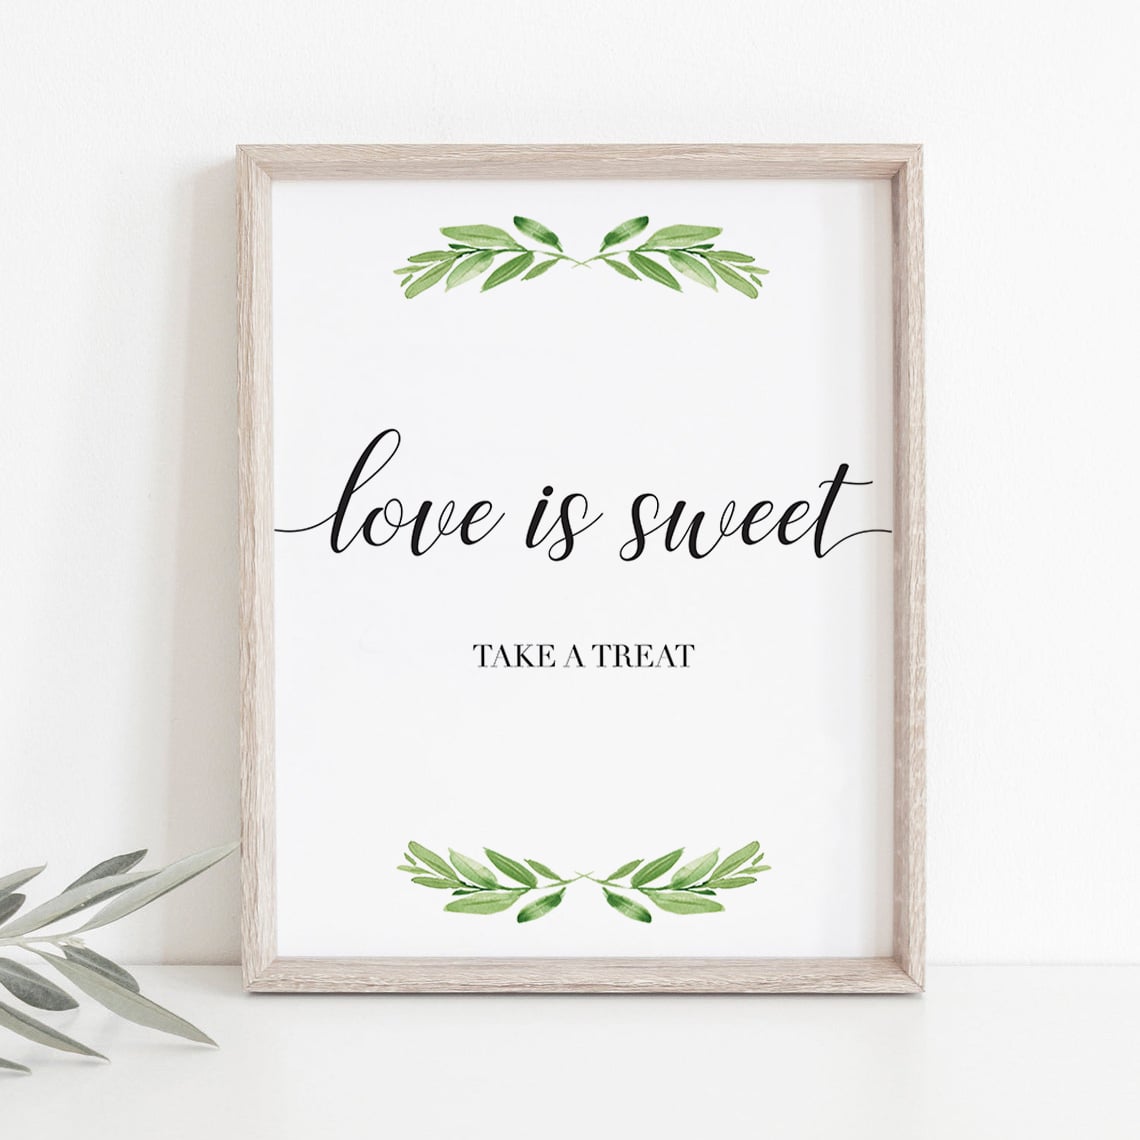 Love is sweet wedding sign printable by LittleSizzle